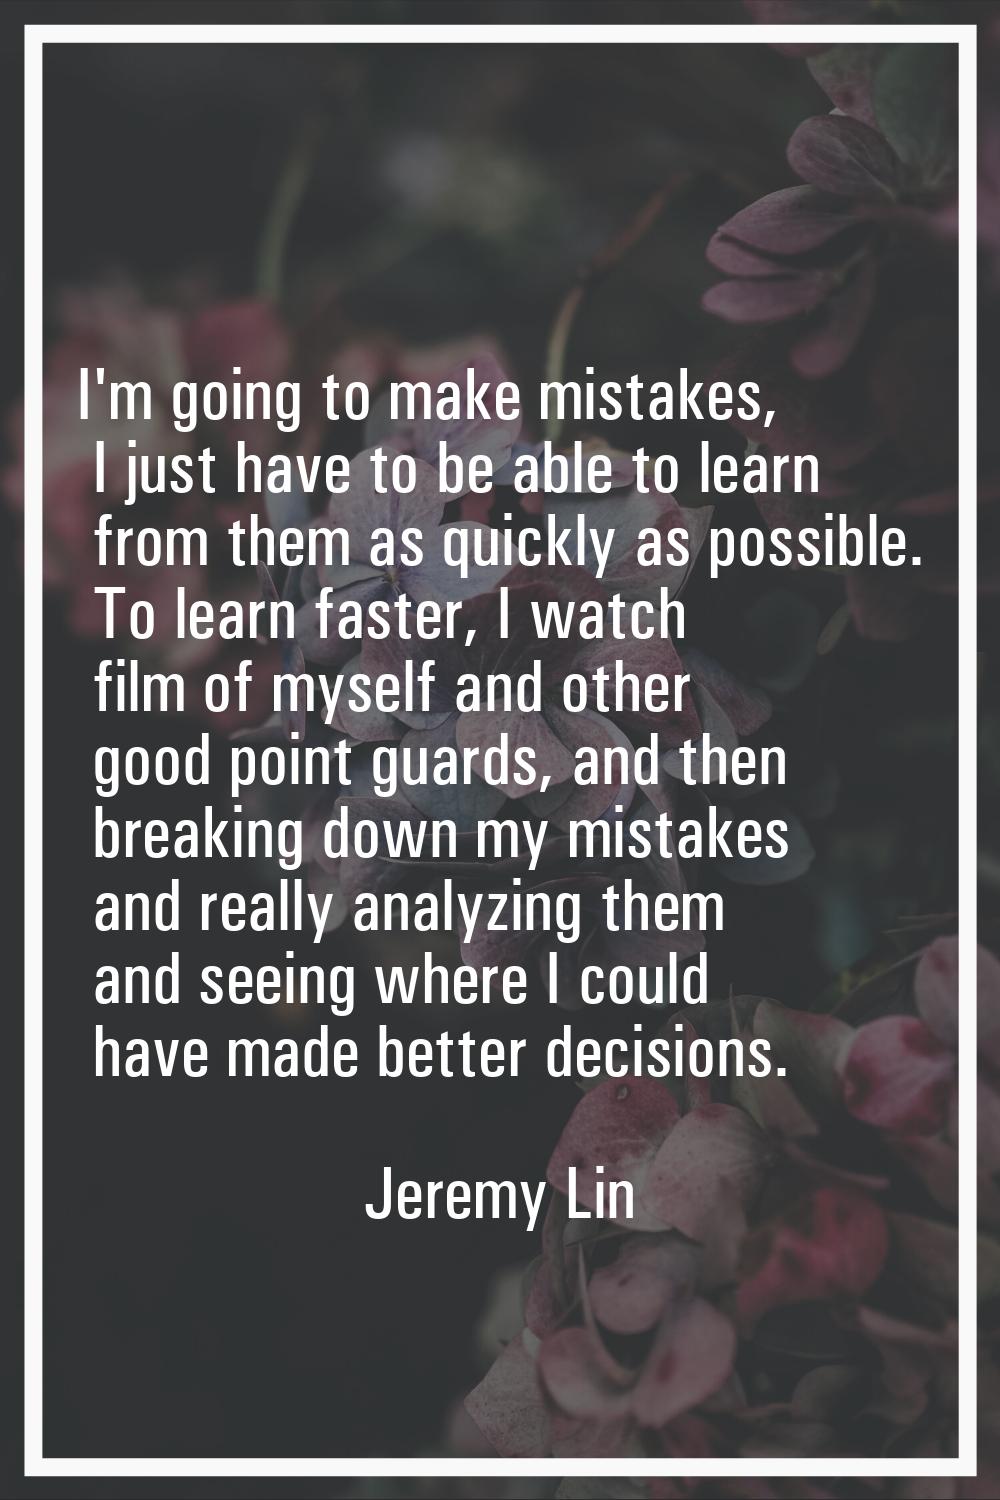 I'm going to make mistakes, I just have to be able to learn from them as quickly as possible. To le